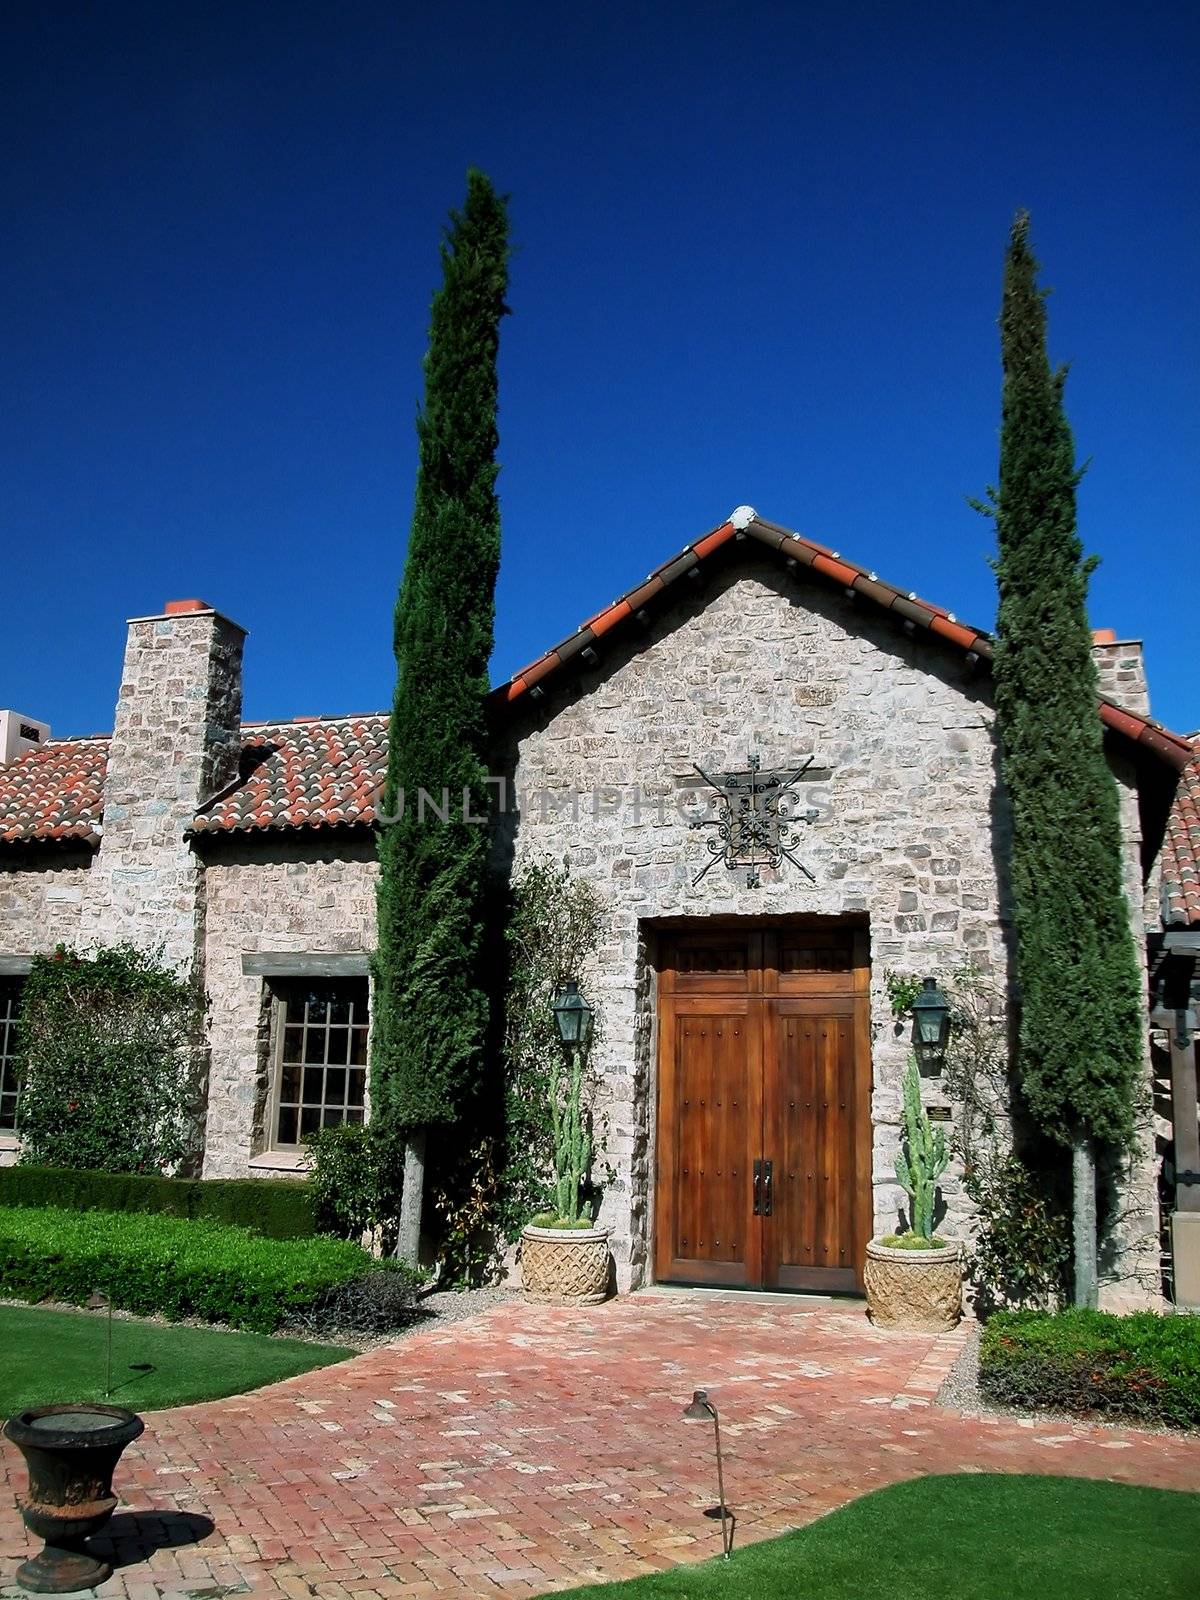 Entrance to a Spanish Style Villa with Blue Sky